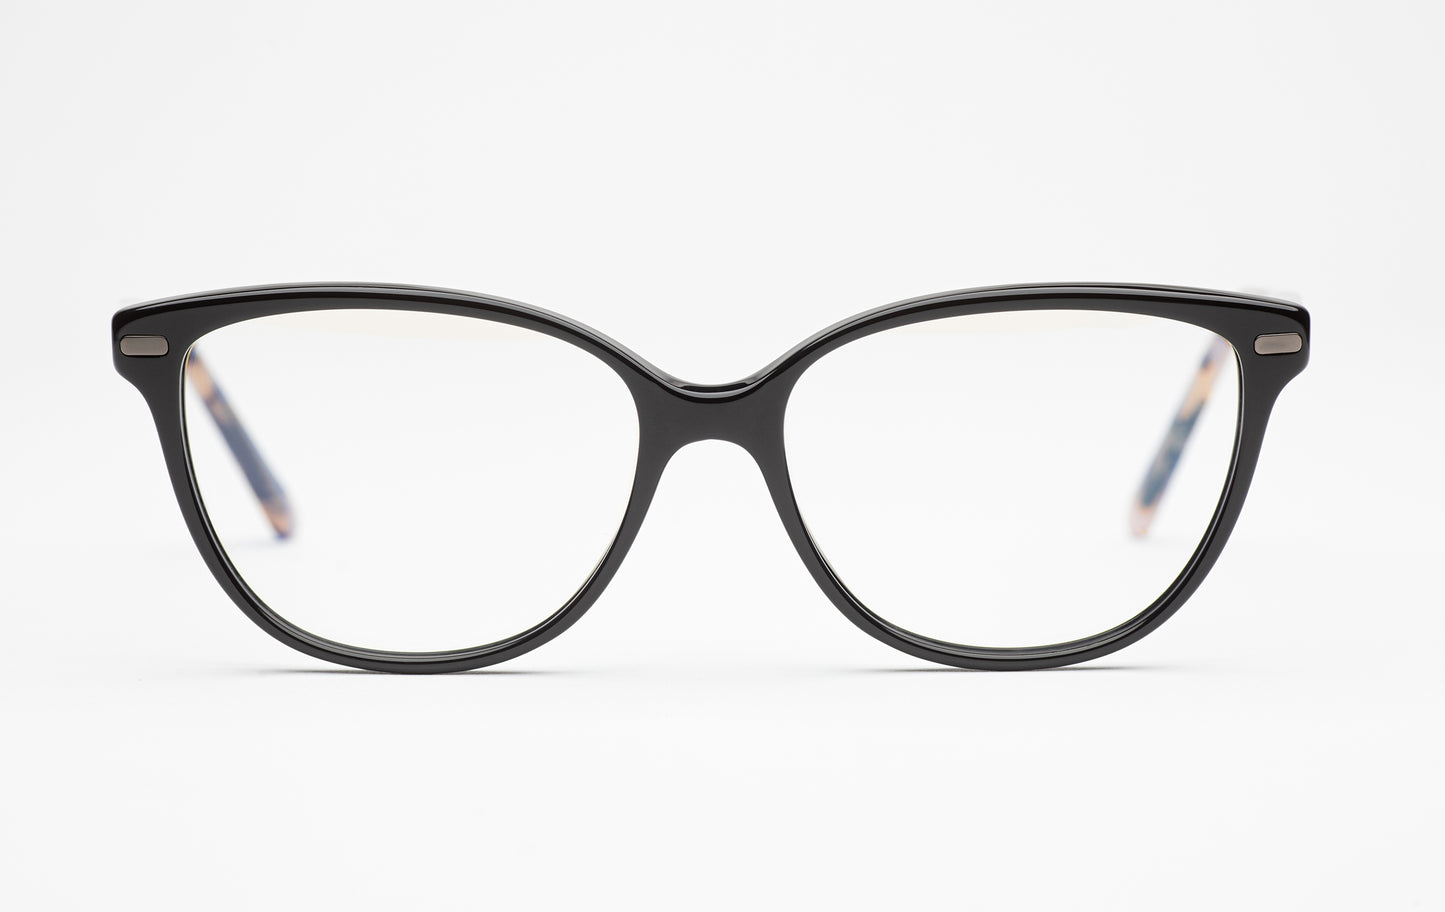 Front view of The Humanist black acetate glasses frames with tortoiseshell stems